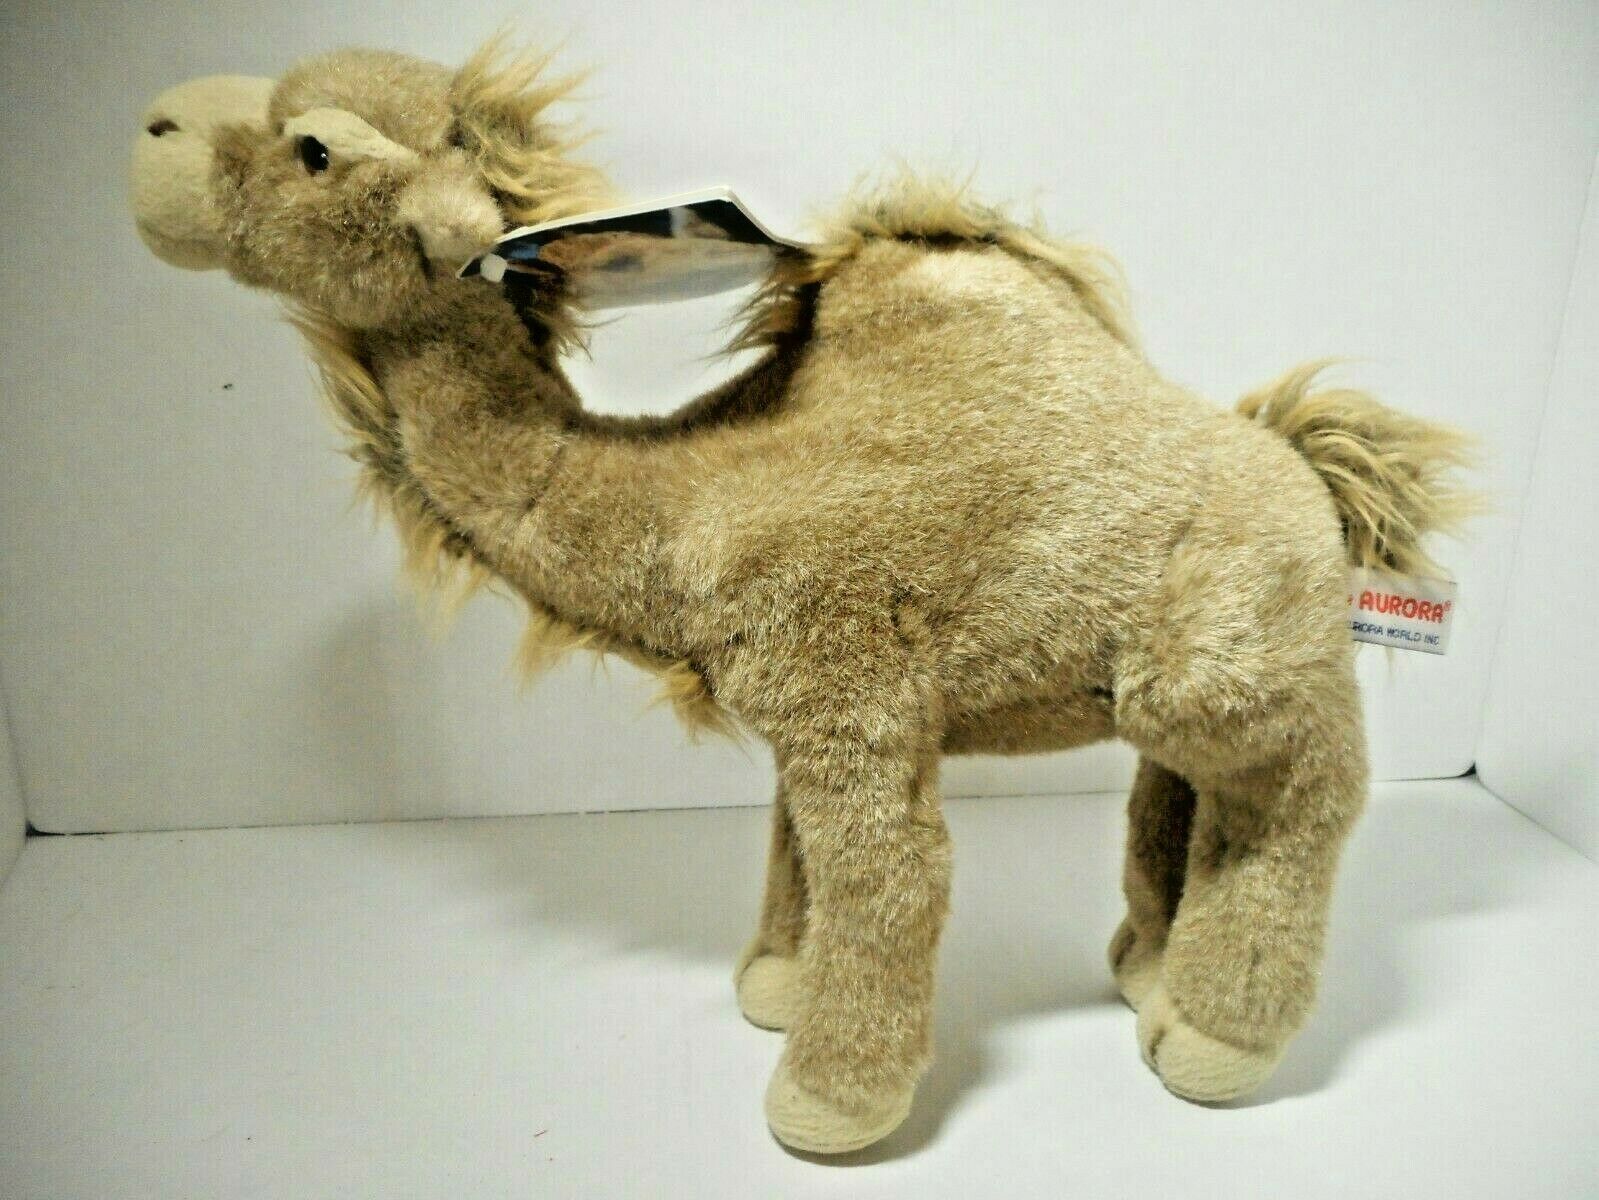 Oasis Camel 12 Inch Stuffed Animal by Aurora Plush 03055 for sale online 